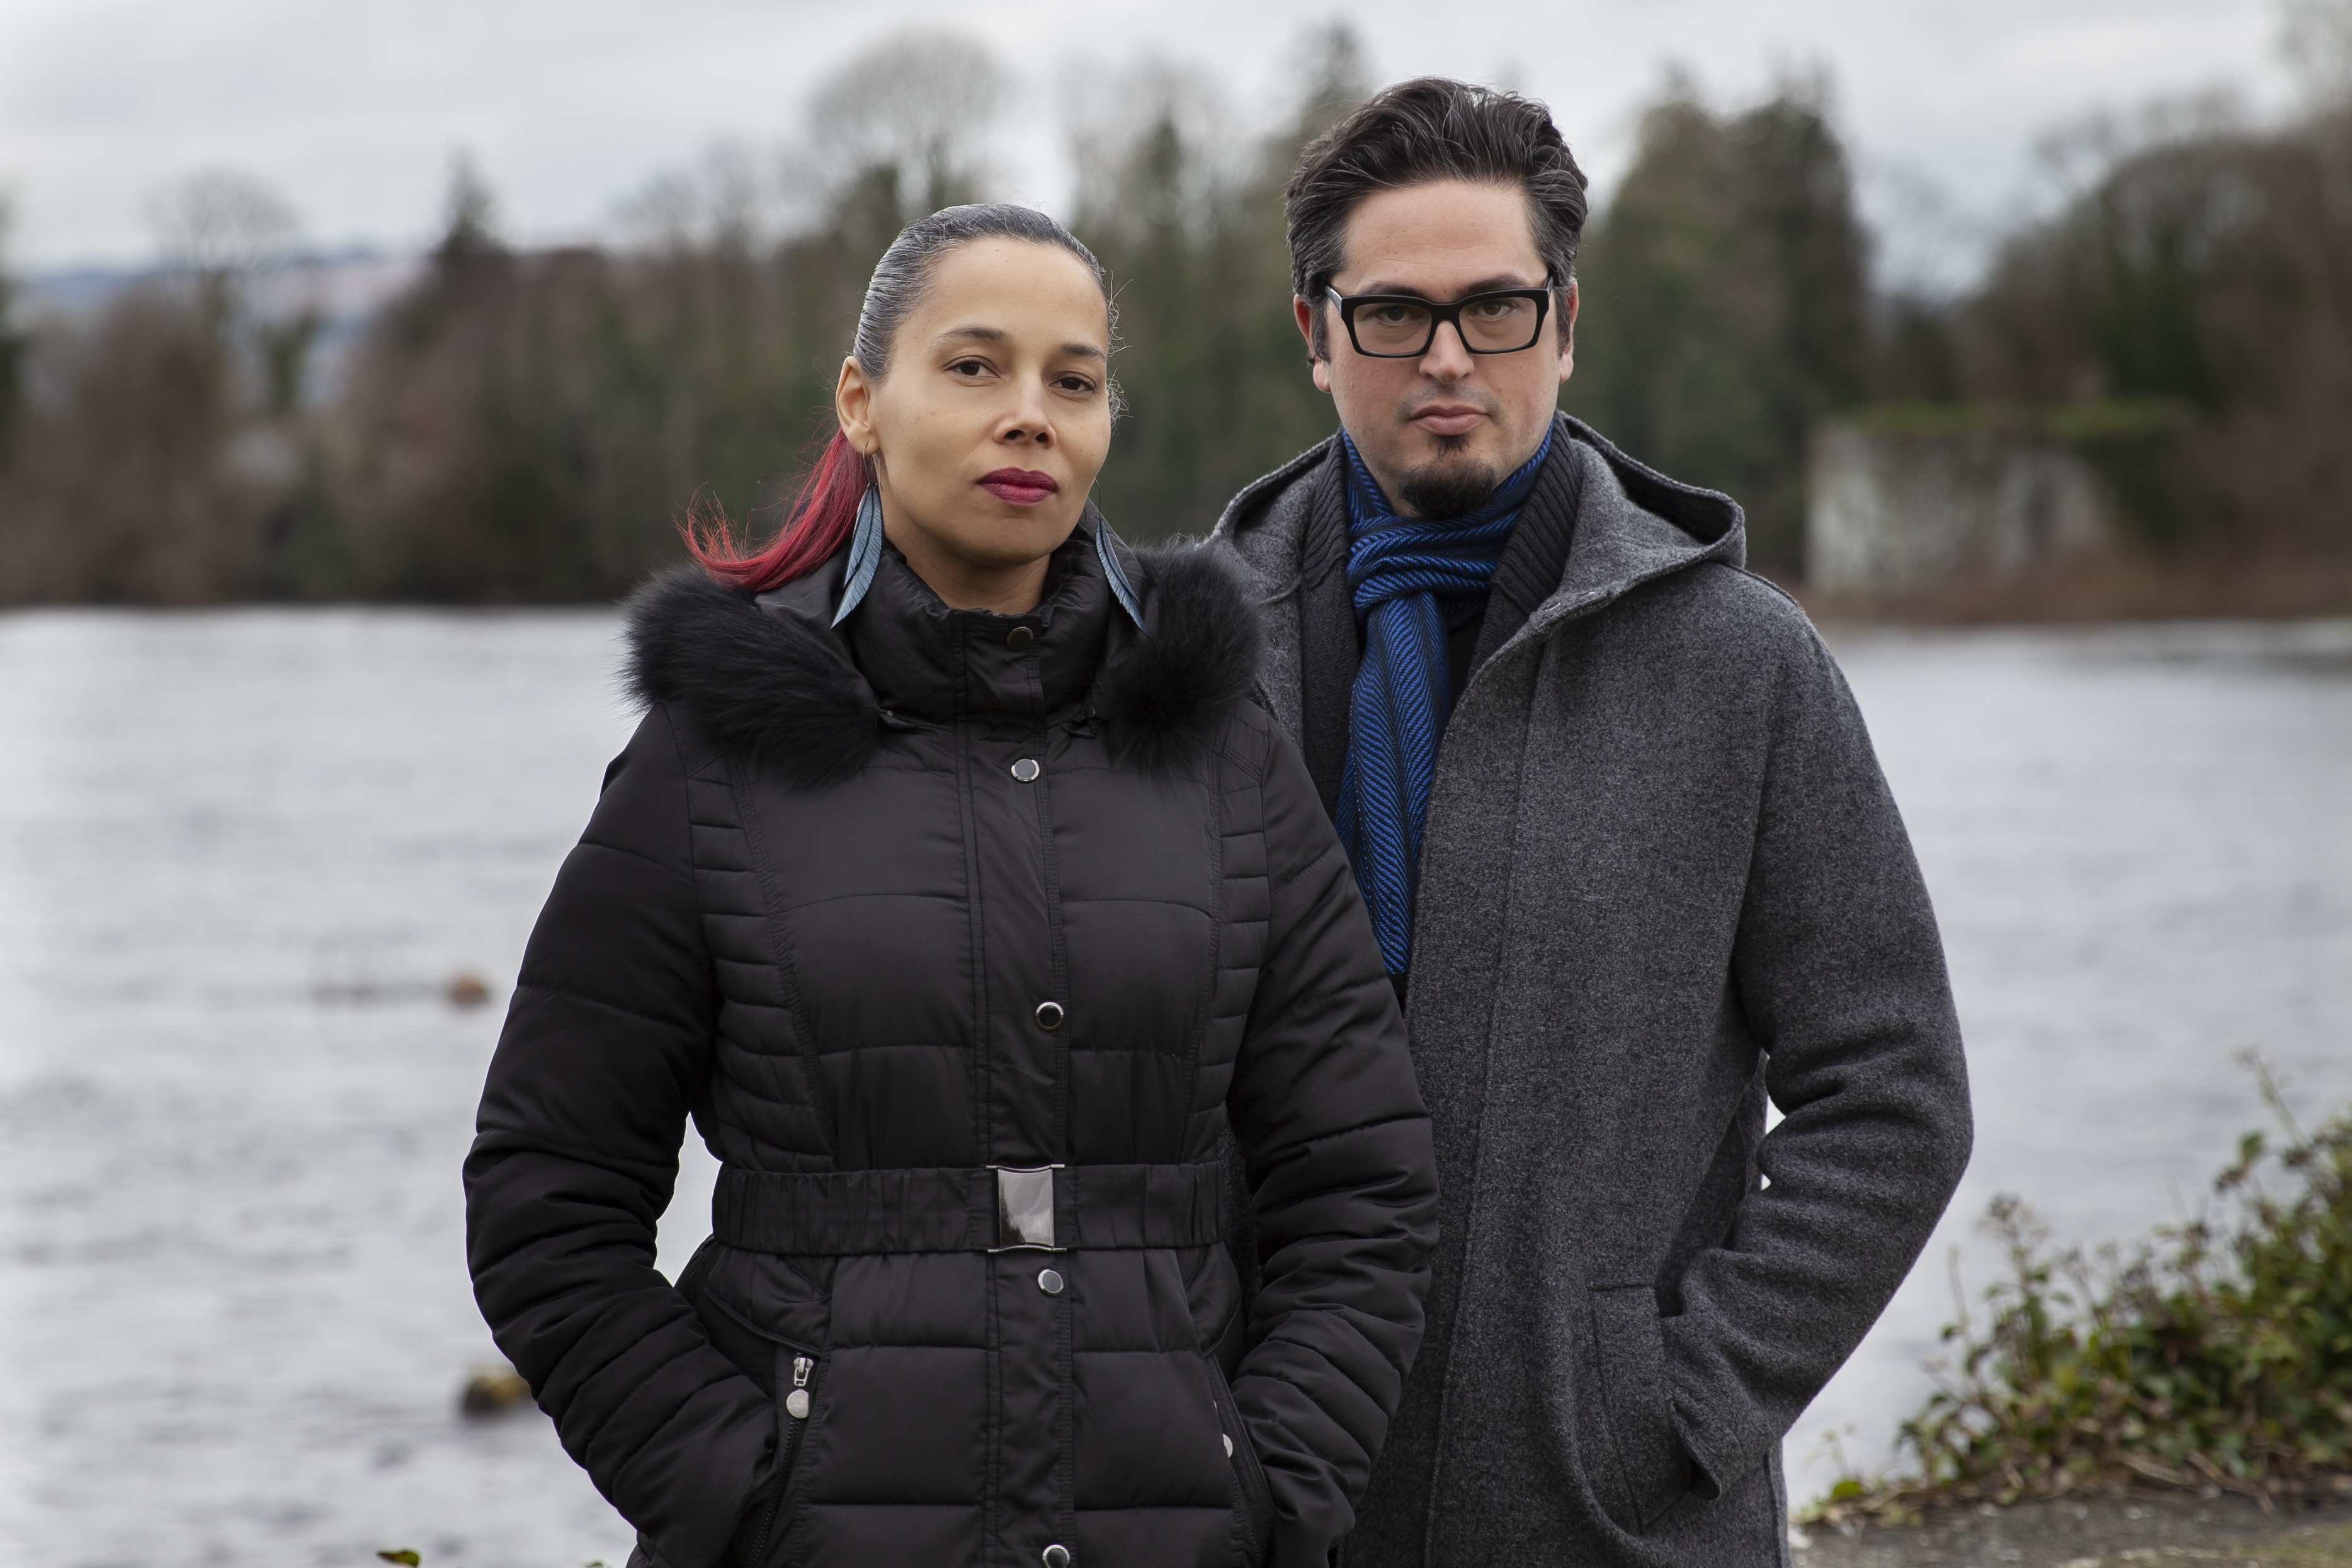 Interview with Rhiannon Giddens and Francesco Turrisi – Between